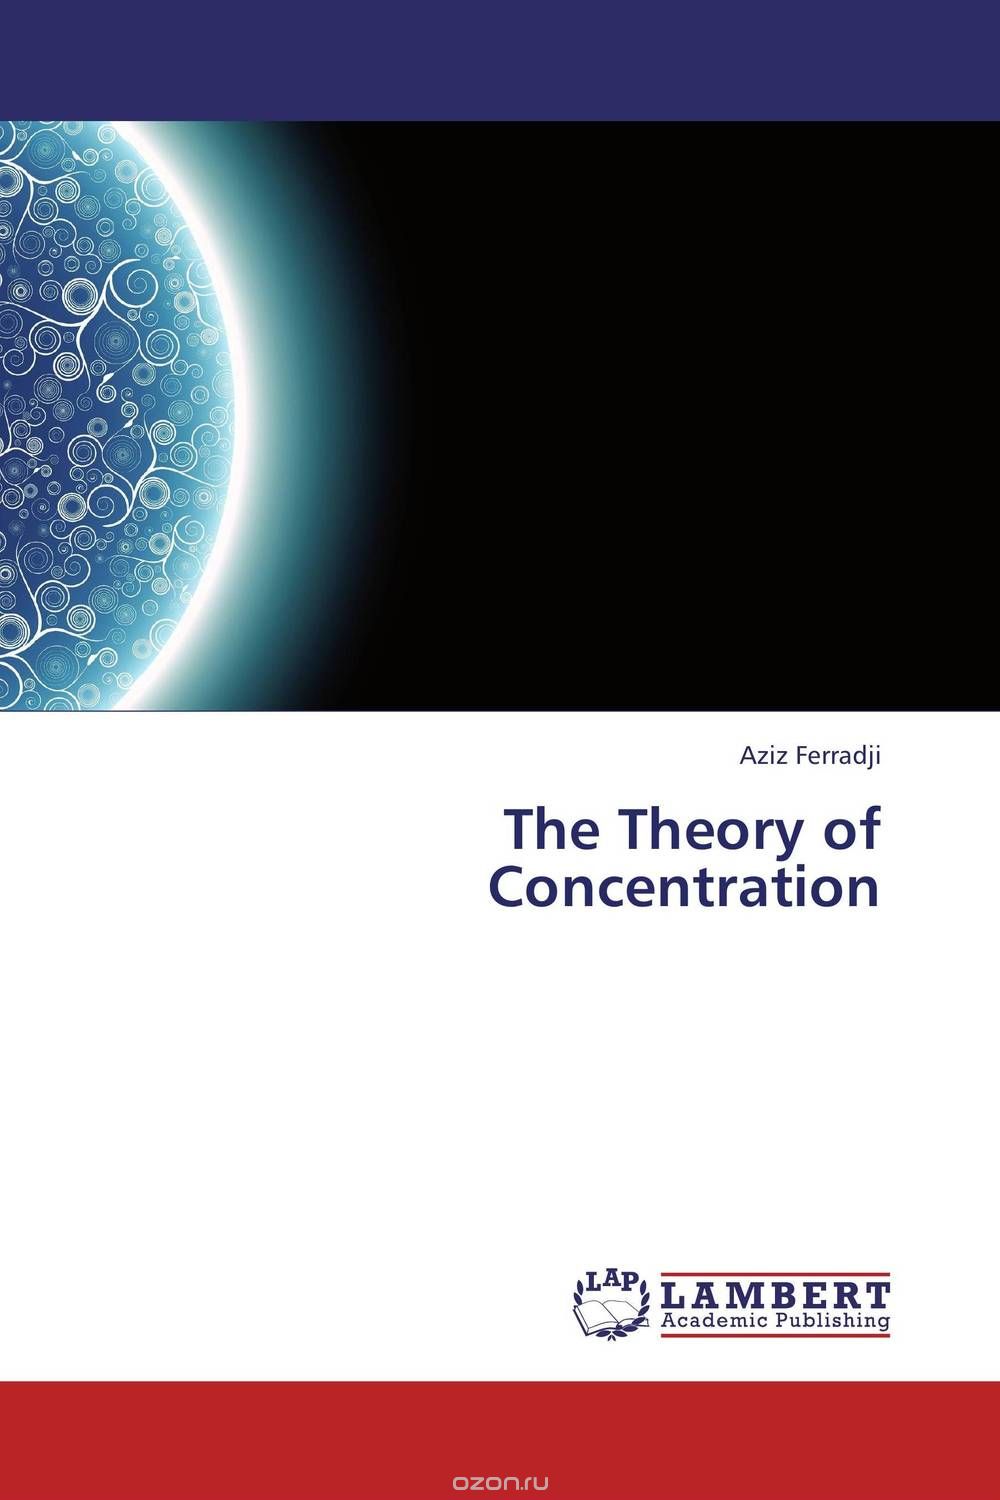 The Theory of Concentration